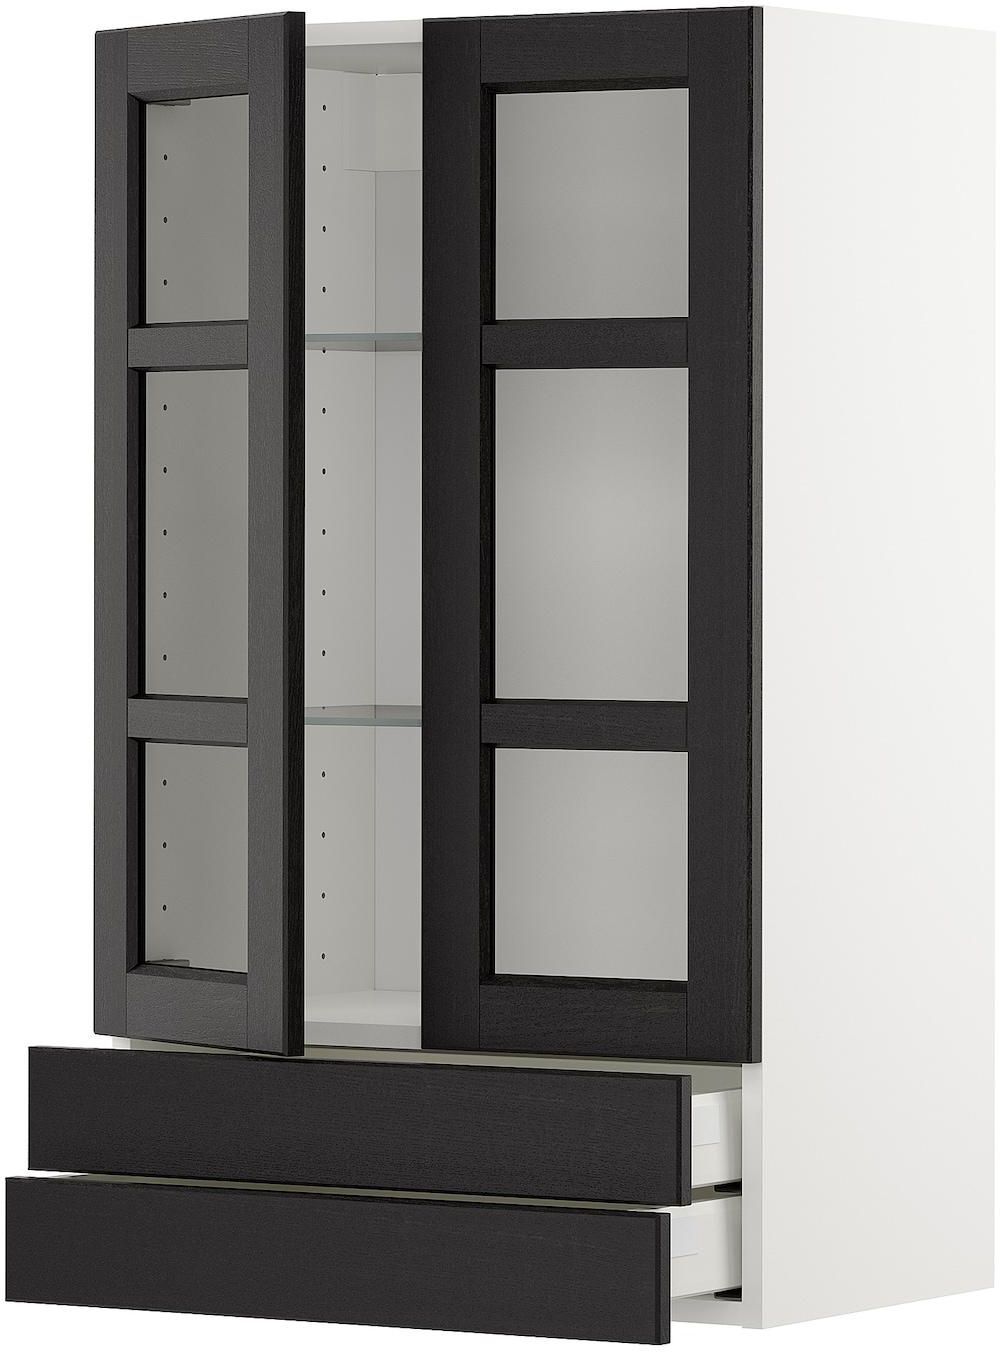 METOD / MAXIMERA Wall cab w 2 glass doors/2 drawers - white/Lerhyttan black stained 60x100 cm